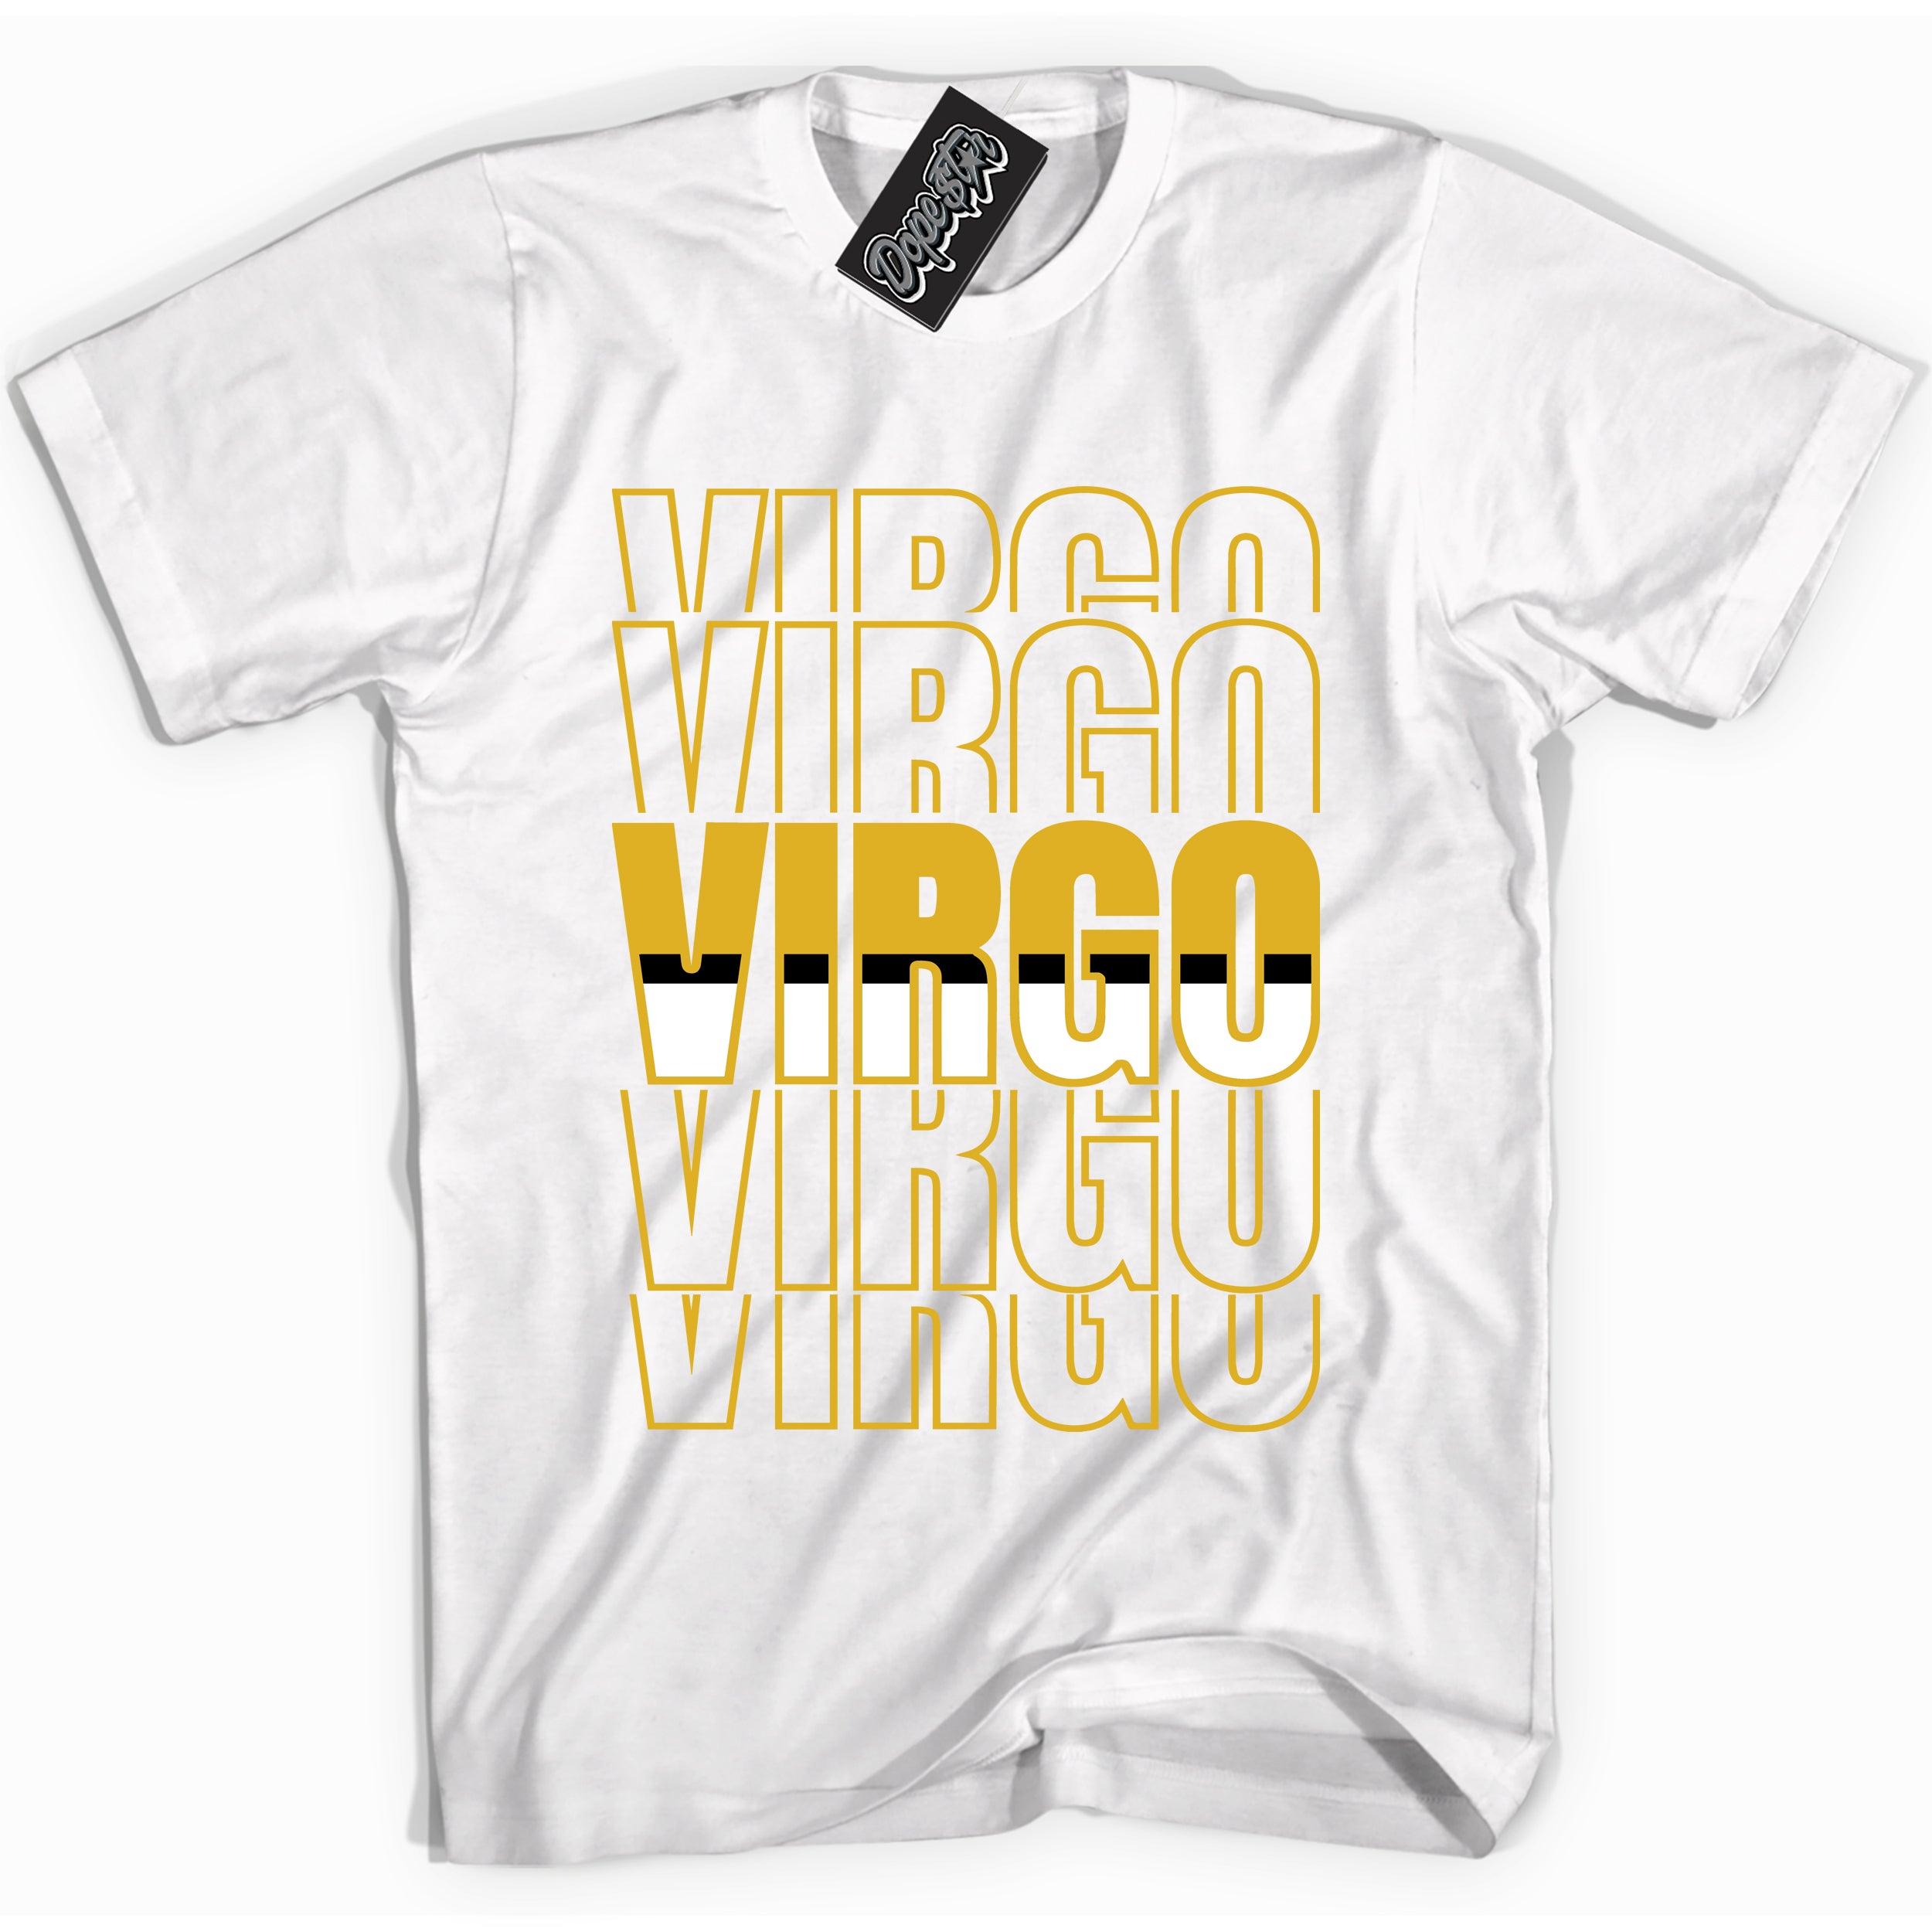 Cool white Shirt with “ Virgo ” design that perfectly matches Yellow Ochre 6s Sneakers.